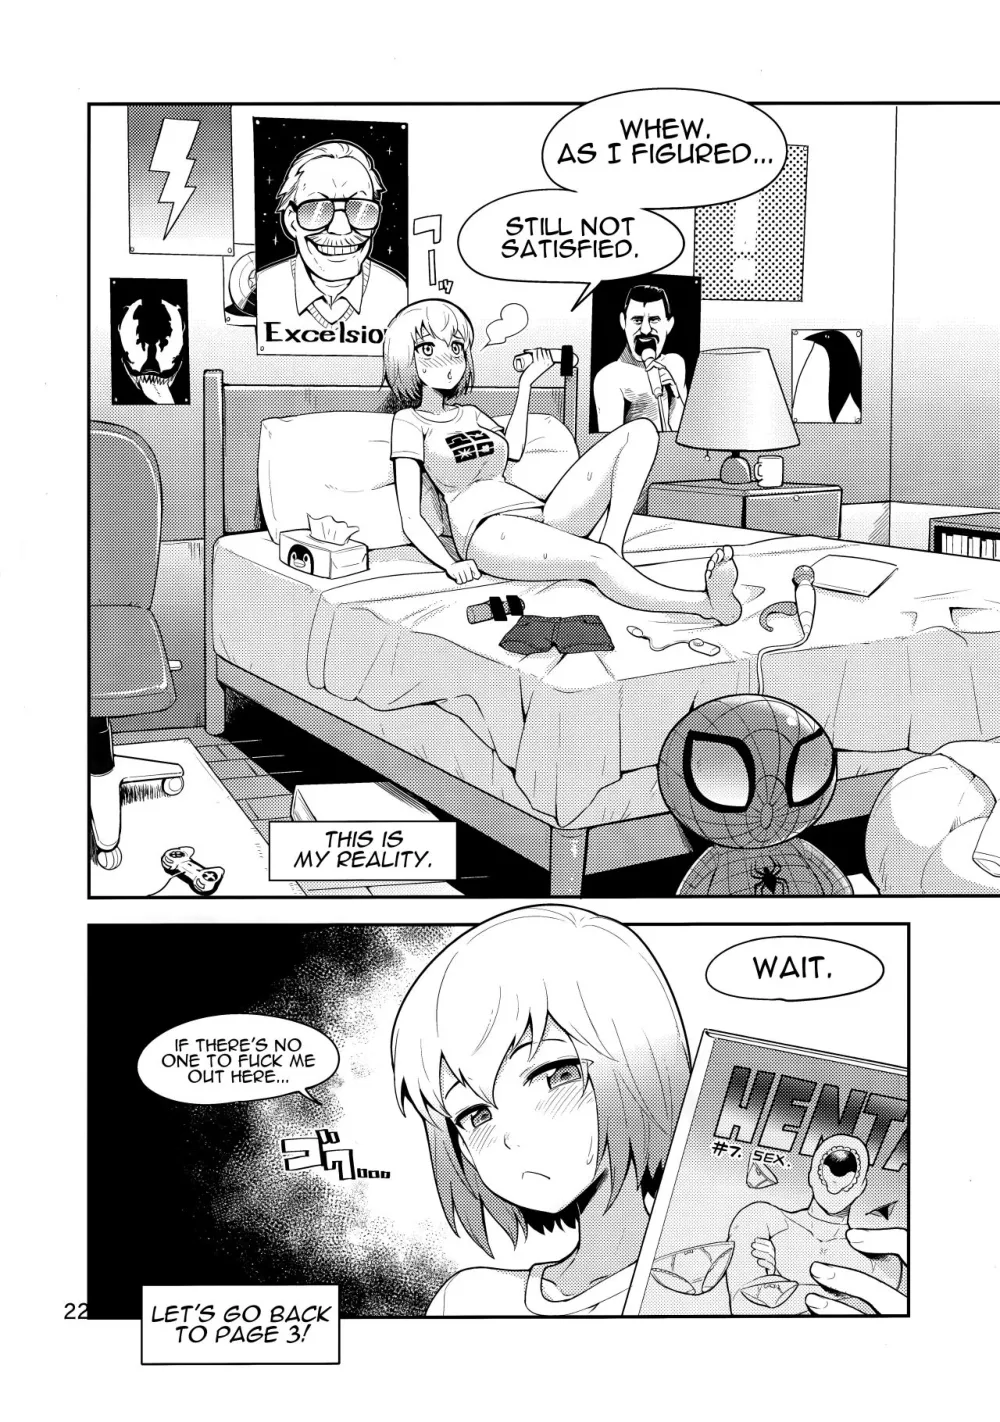 Gwenpool (Jumping Into an Indecent World) - Page 21